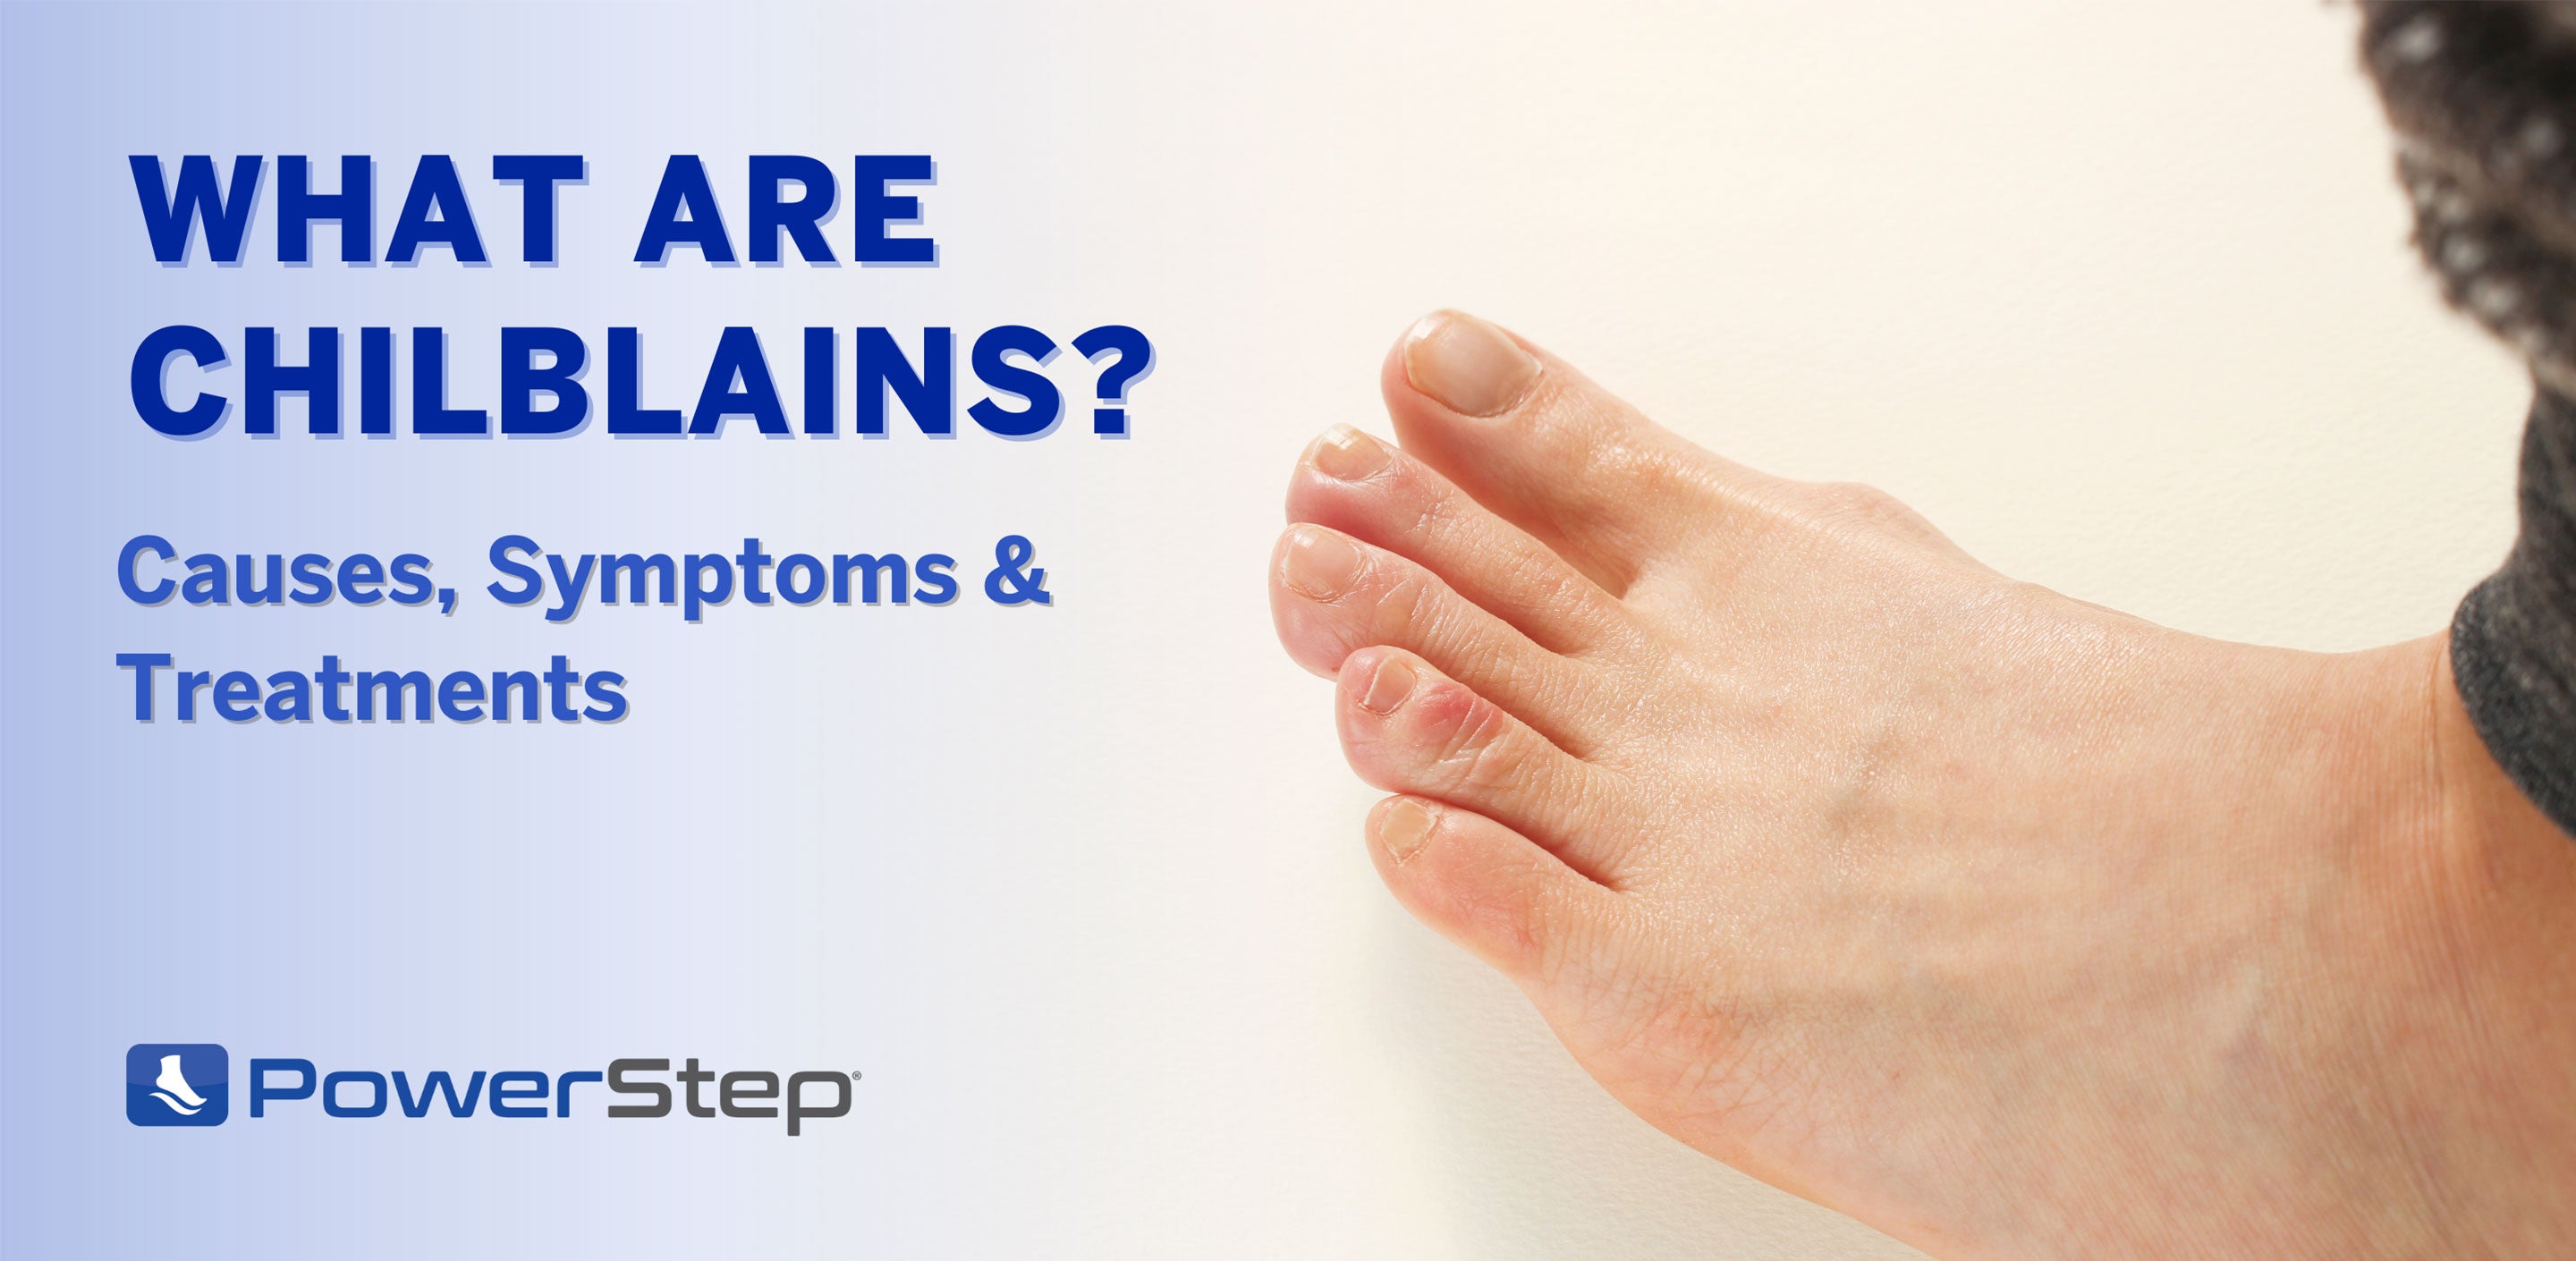 What are Chilblains? Causes, Symptoms & Treatment by PowerStep